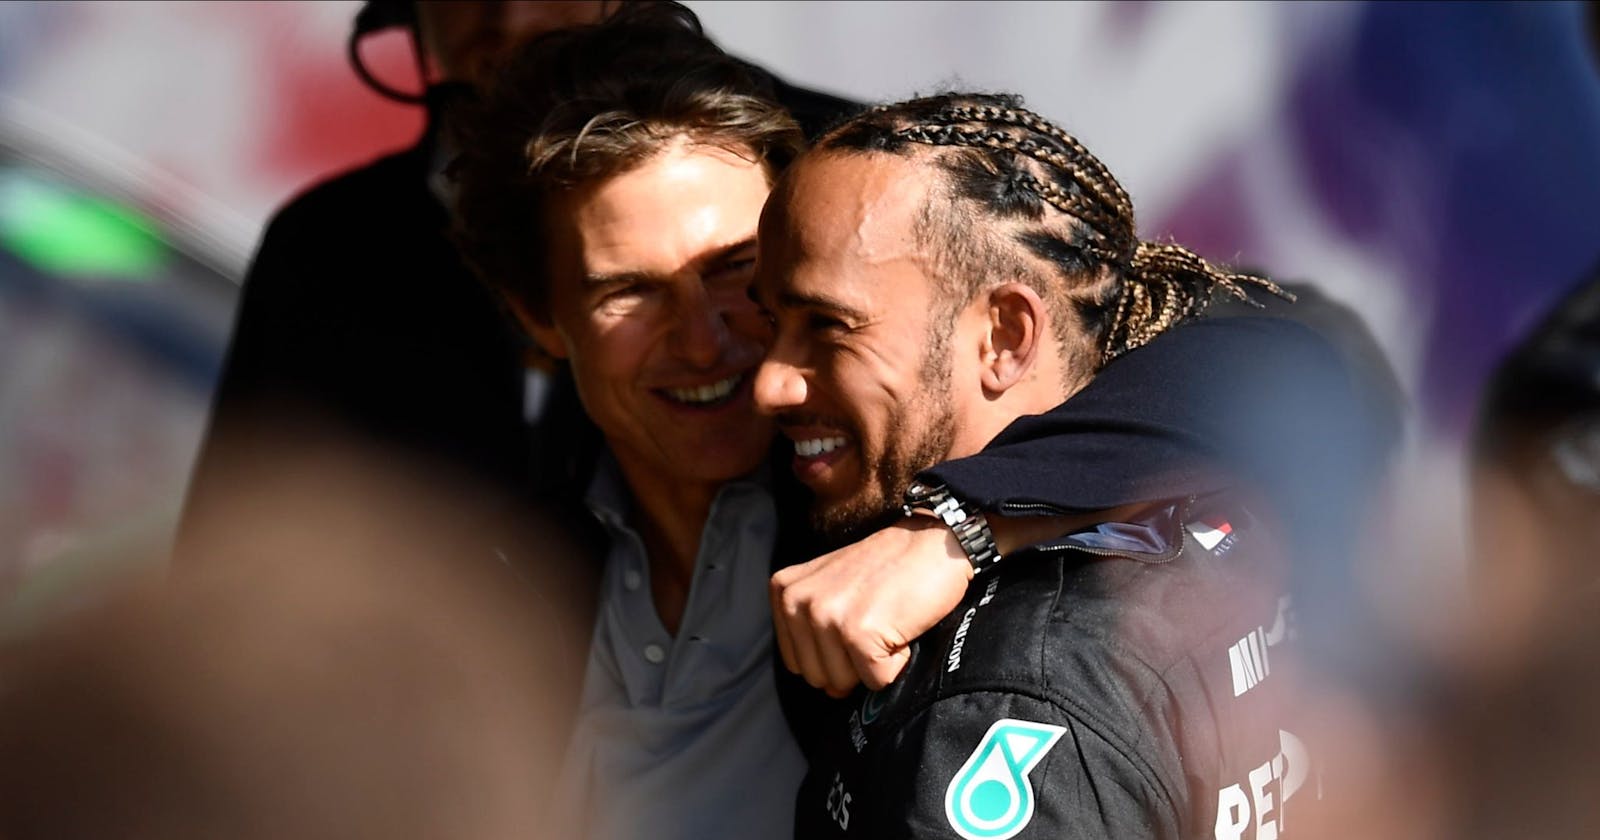 Lewis Hamilton had to turn down part in Top Gun with Tom Cruise due to F1 commitments